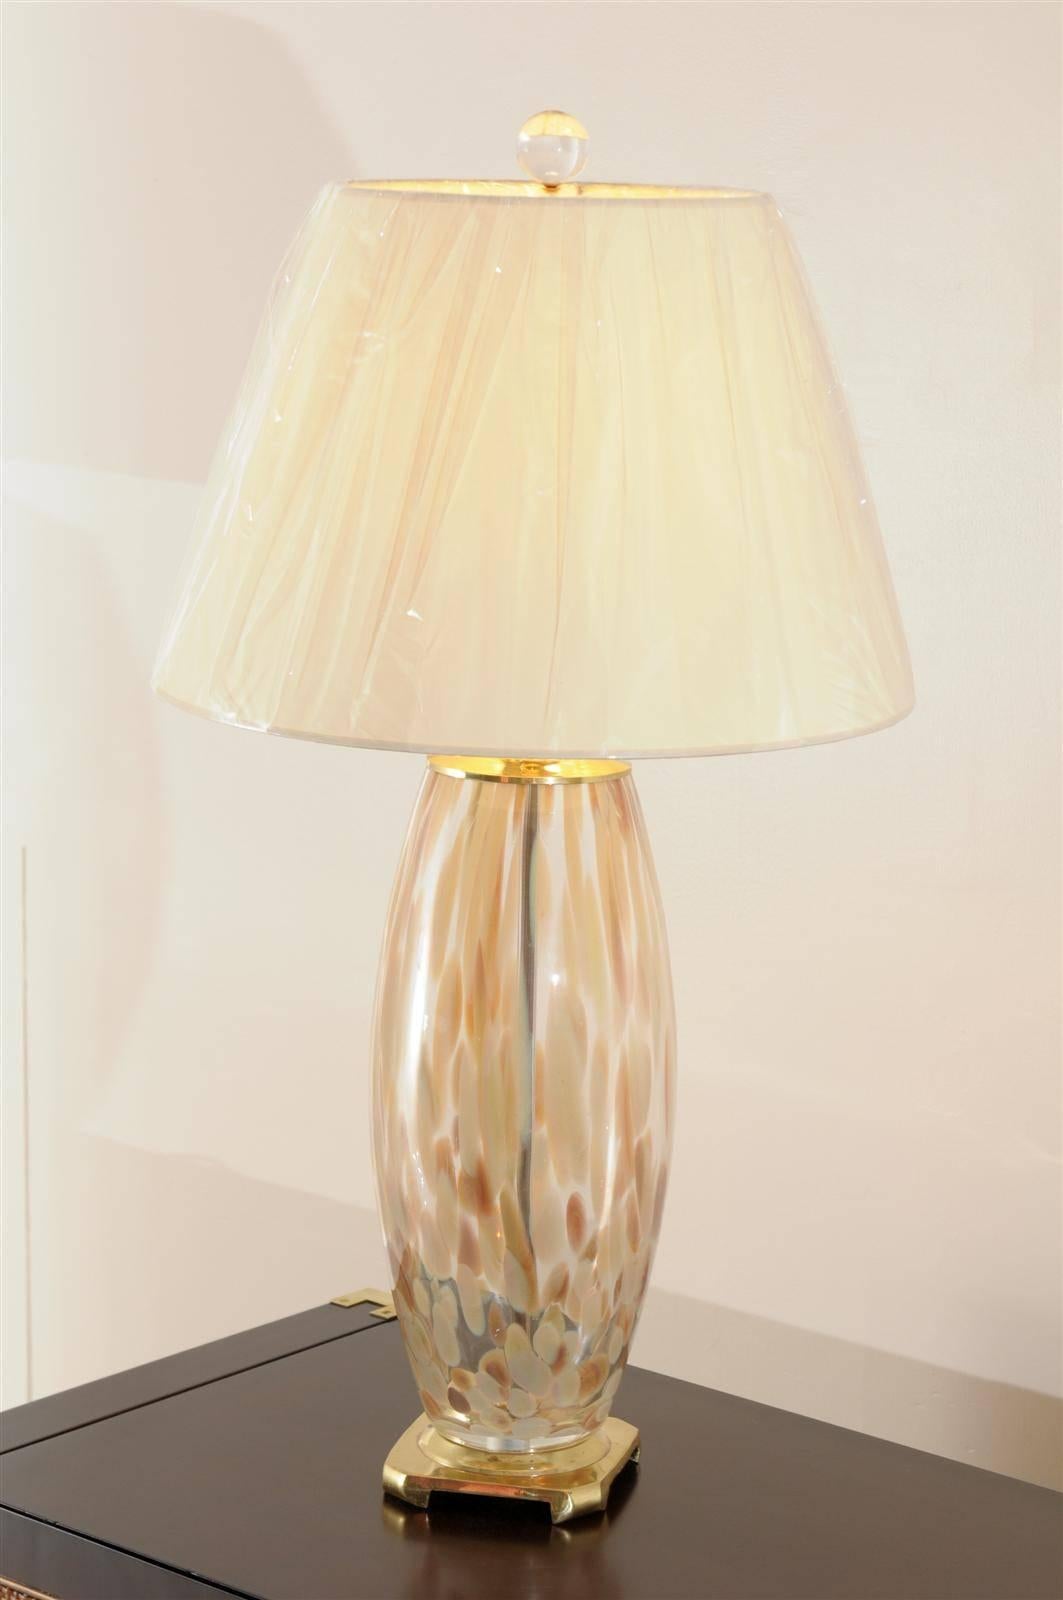 Stunning Pair of Blown Murano Lamps with Brass and Lucite Accents In Excellent Condition For Sale In Atlanta, GA